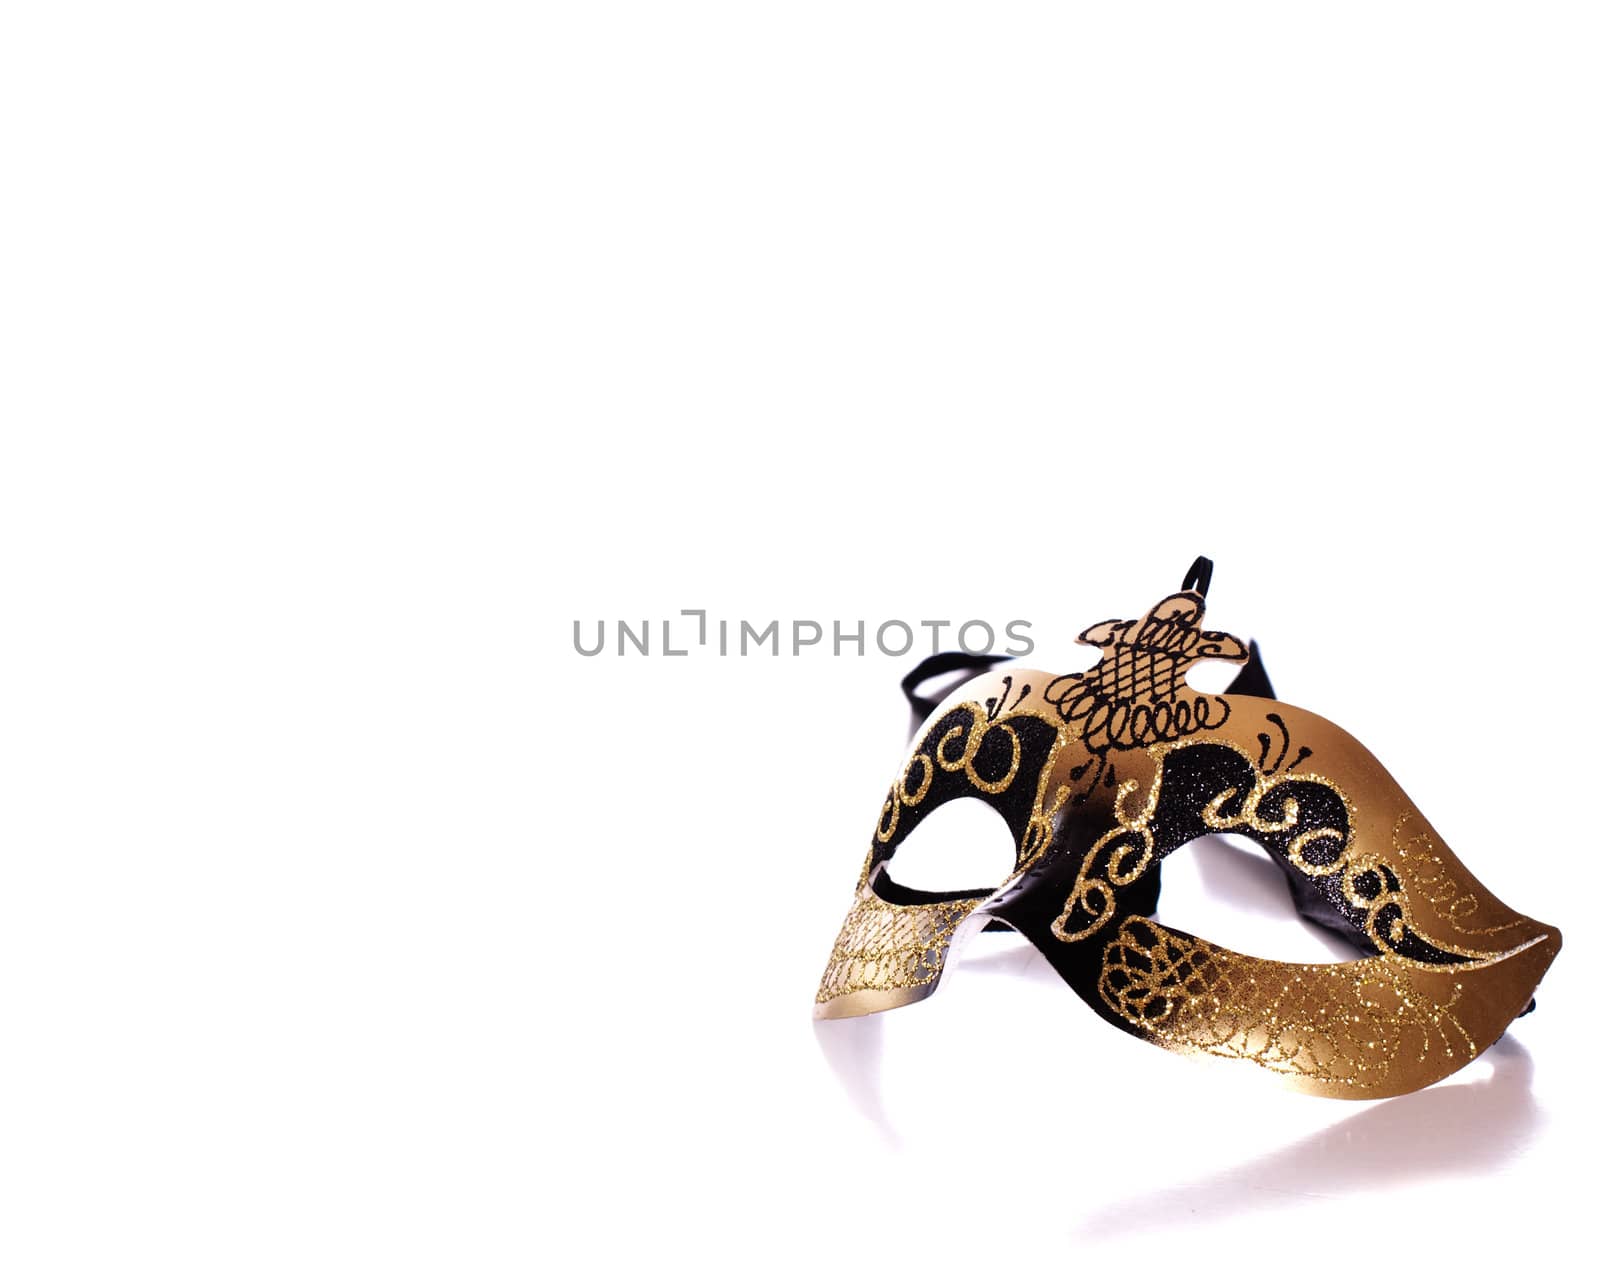 A fancy venetian mask shot against a white background with part of it's reflection in front